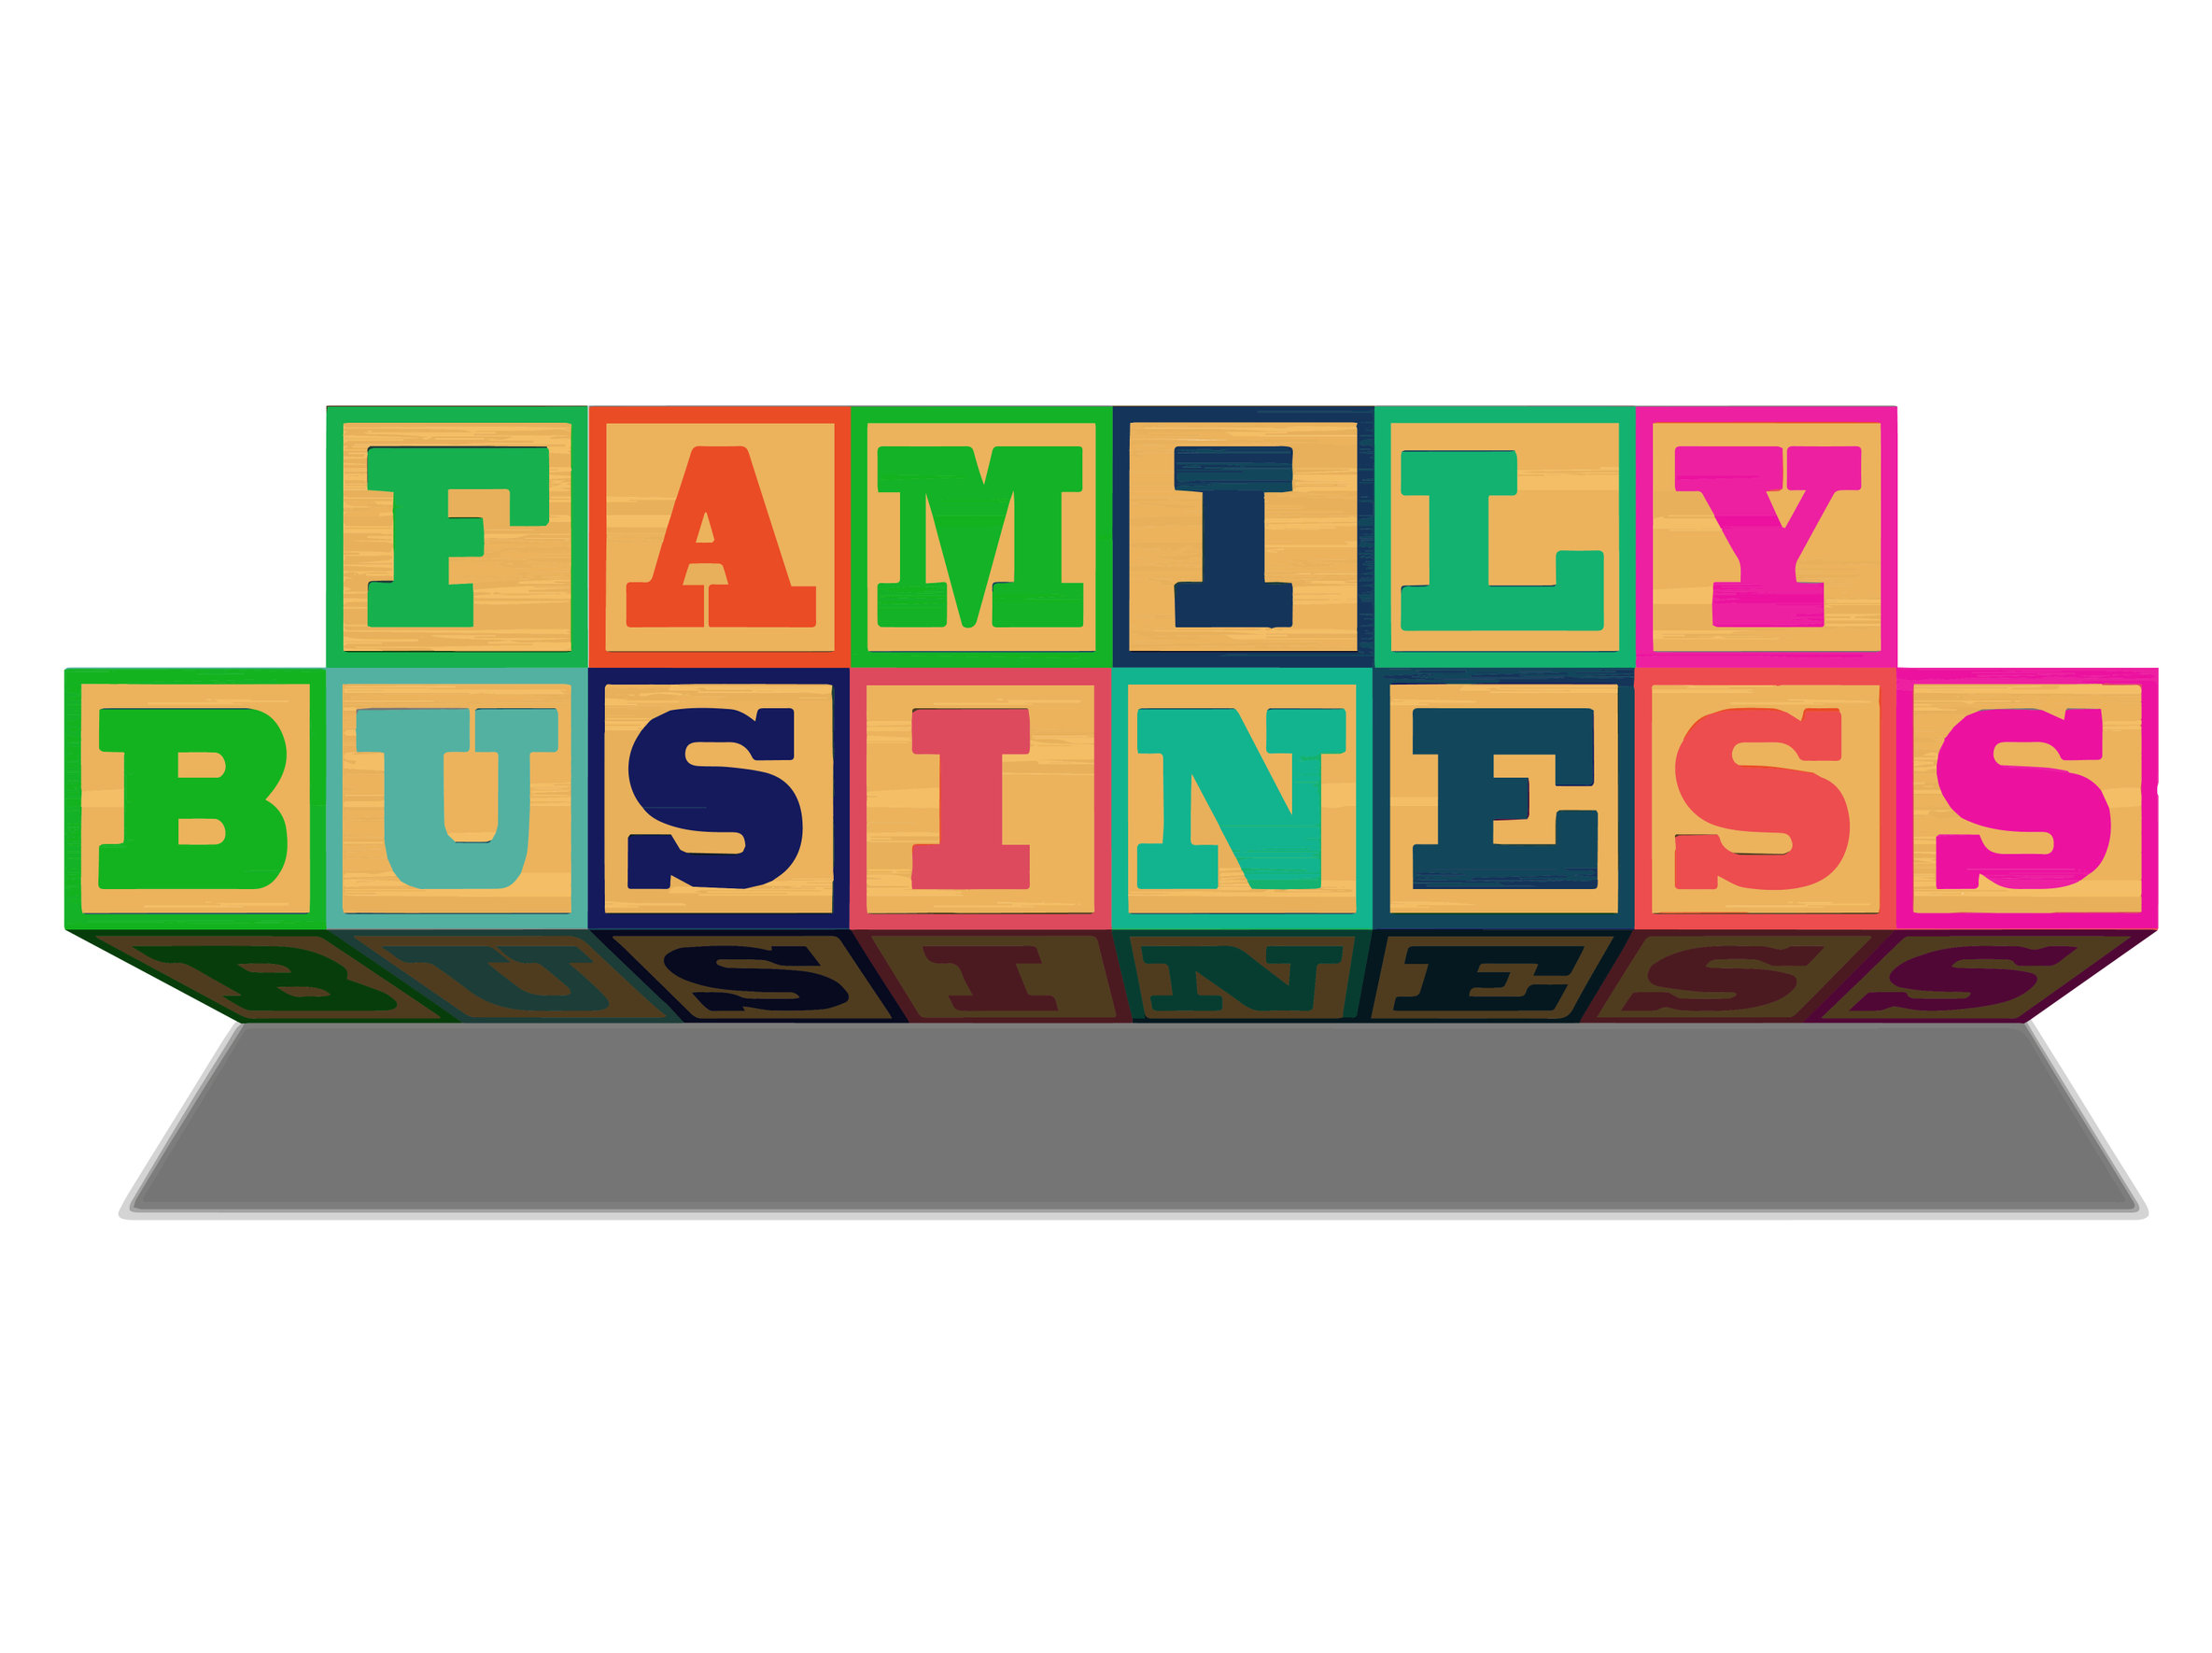 Our Roofing Company Is Proud to Be a Family-Owned Business